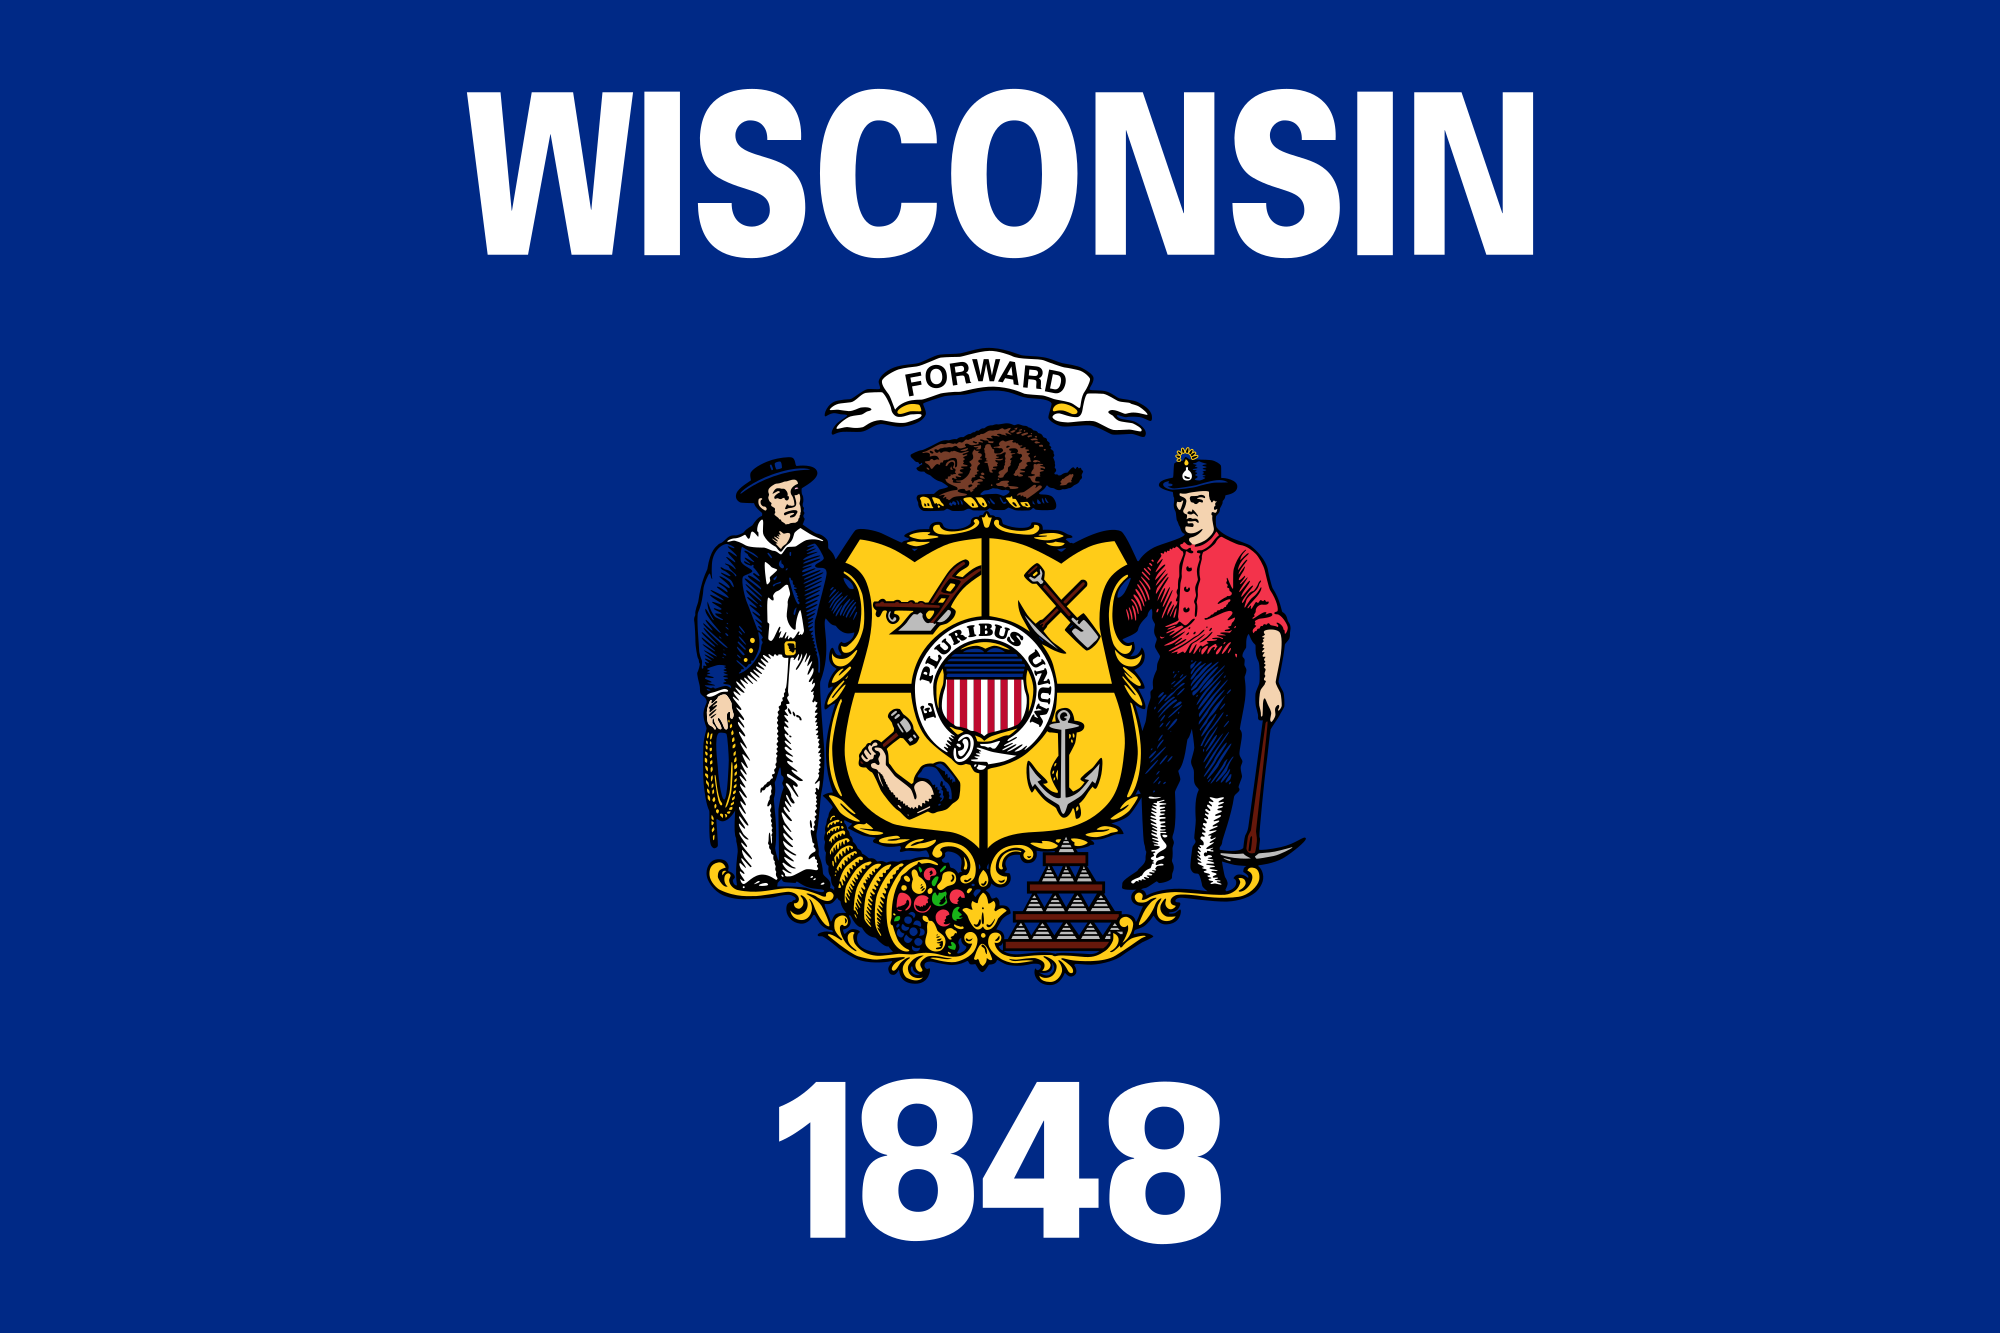 The Wisconsin State Flag.